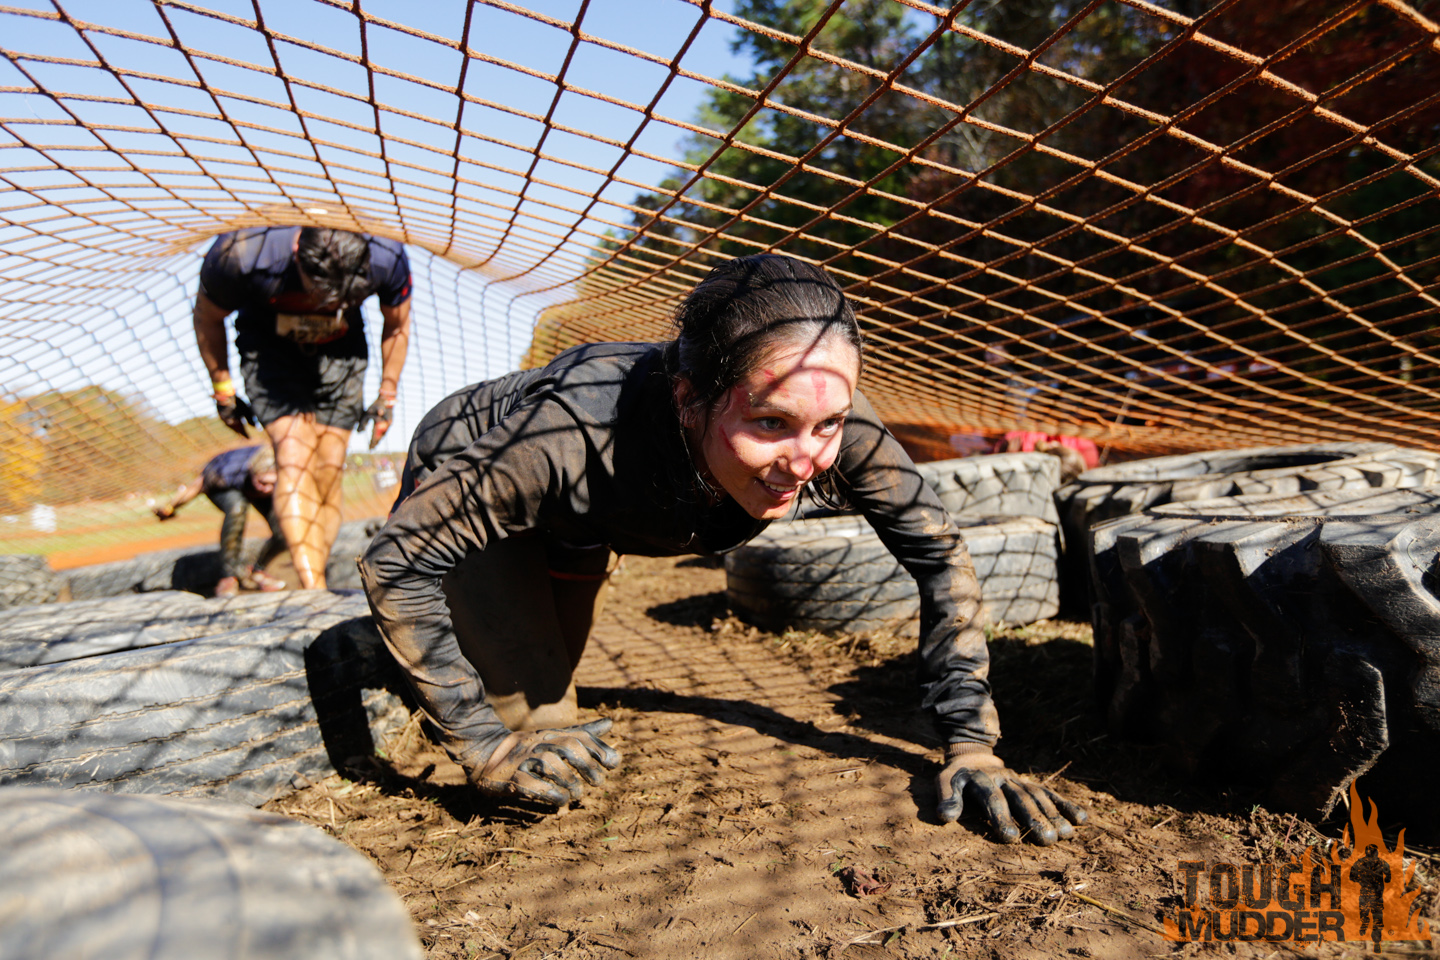 Video: Think you can get through this obstacle race, that's coming to Oman?